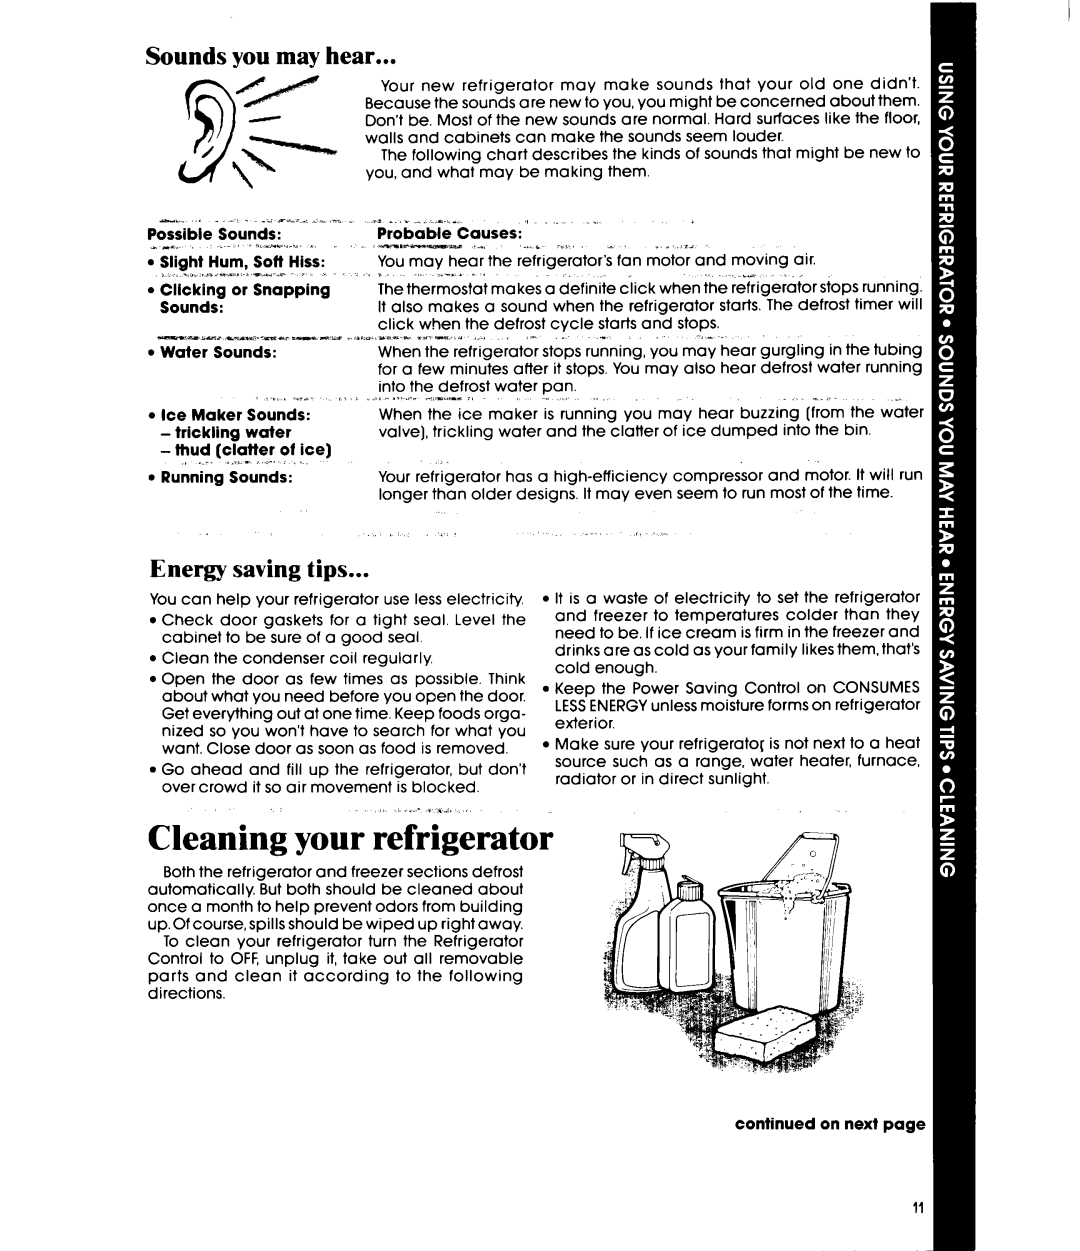 Whirlpool ED25DW manual Cleaning your refrigerator, Sounds you may hear, Energy saving tips 